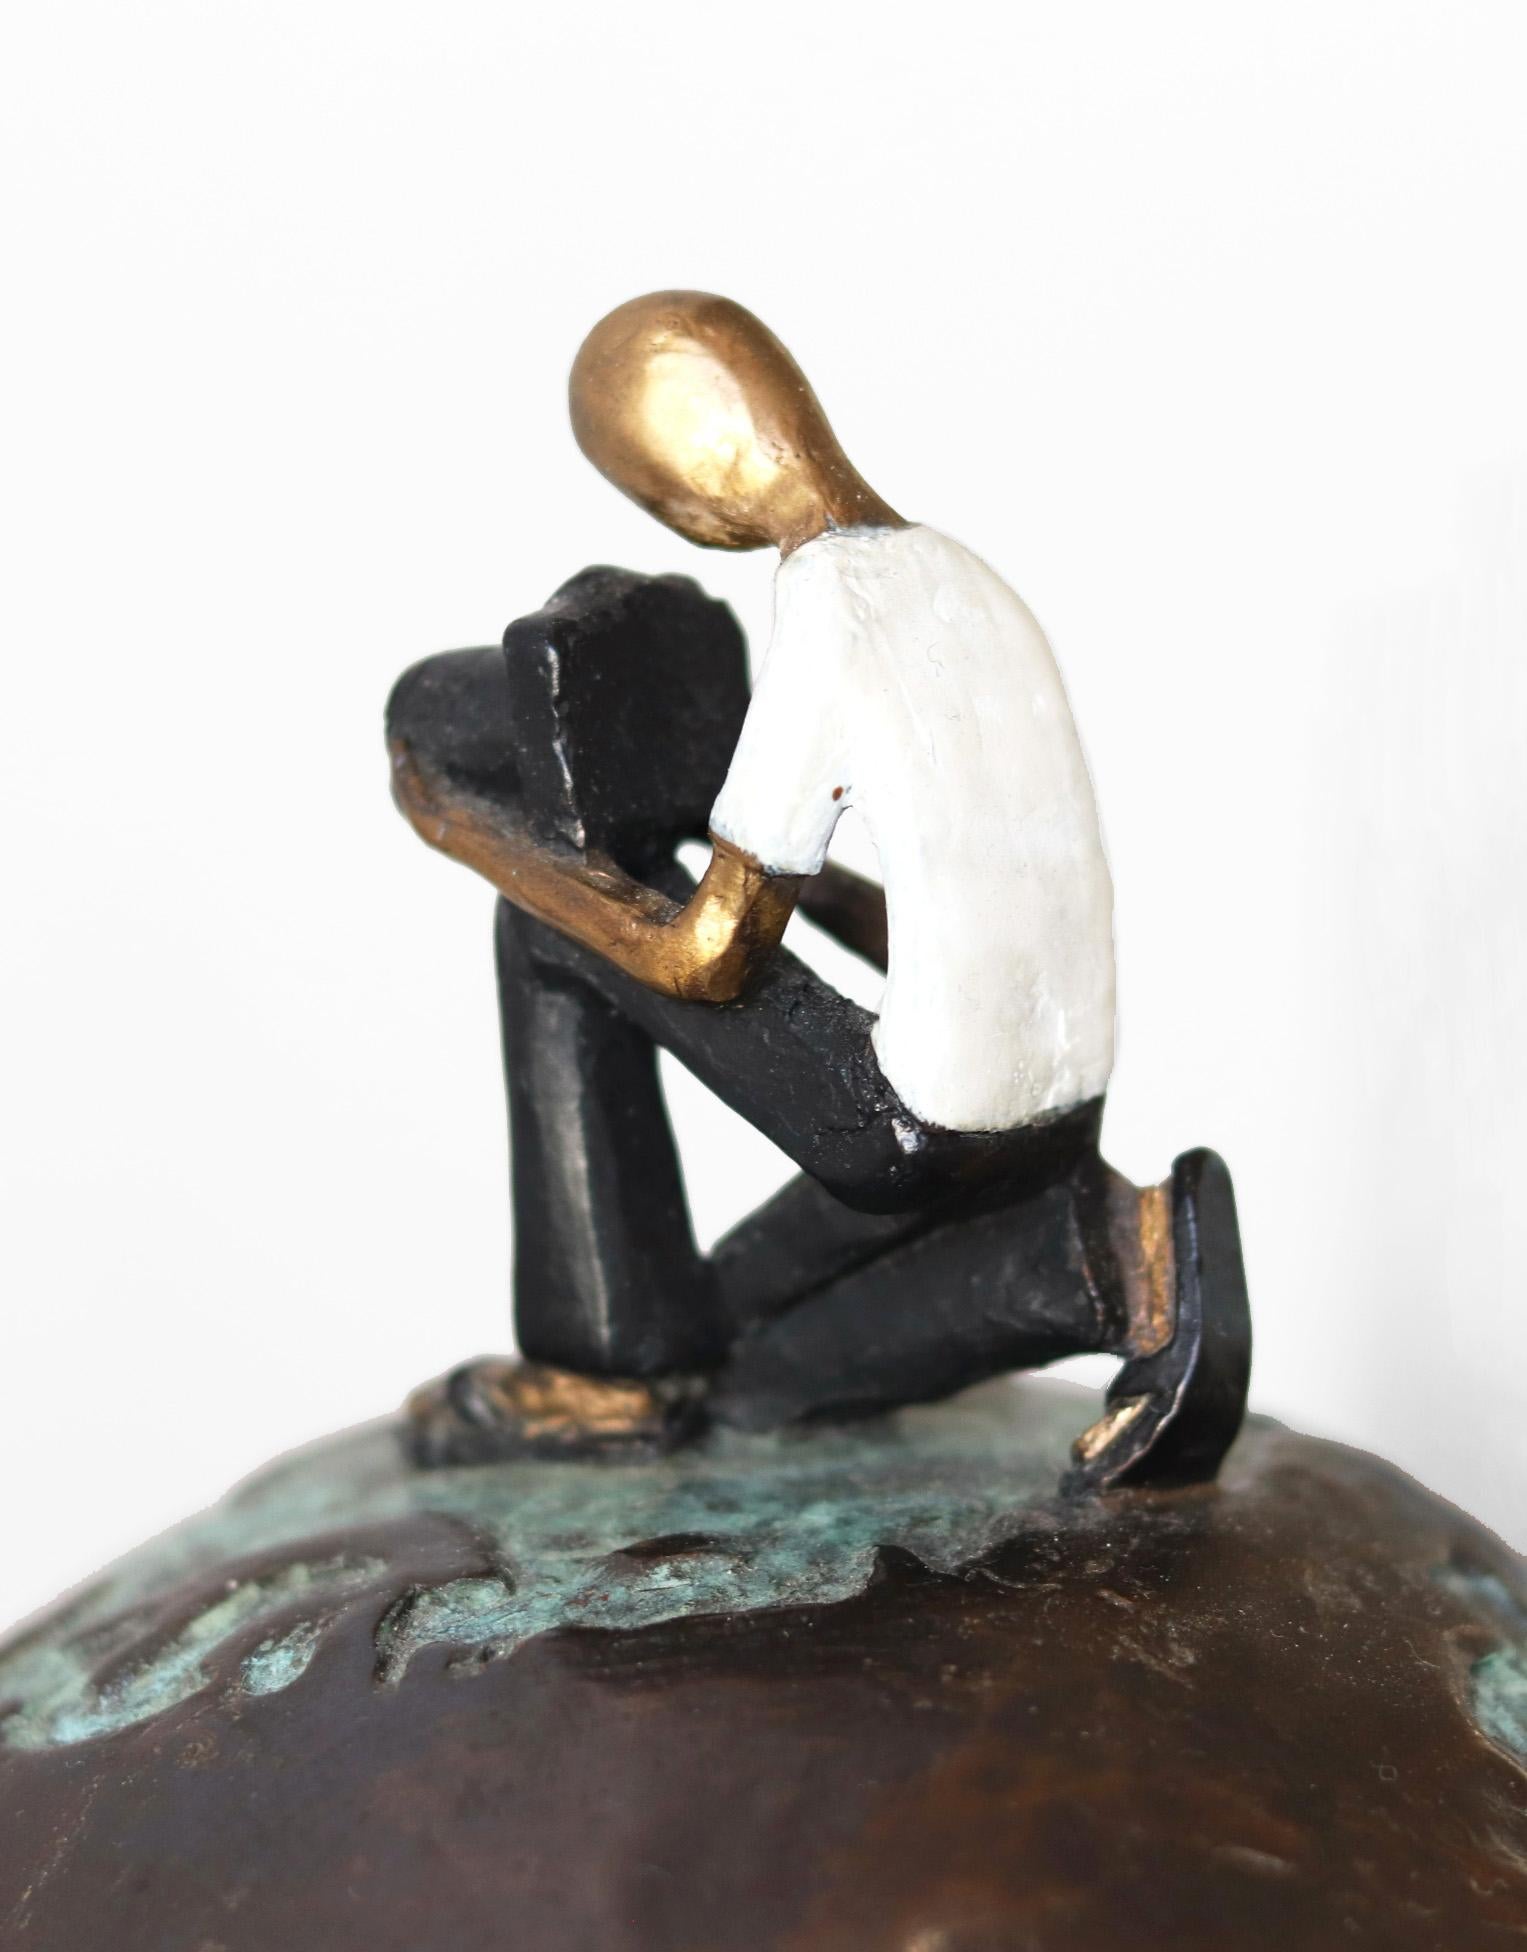 Mireia Serra creates sensuous bronze and iron sculptures showing the beauty of snapshots caught in life which are full of emotions and feelings along the life journey. Her metal artworks capture the beauty of moments:  A young lady challenged by the